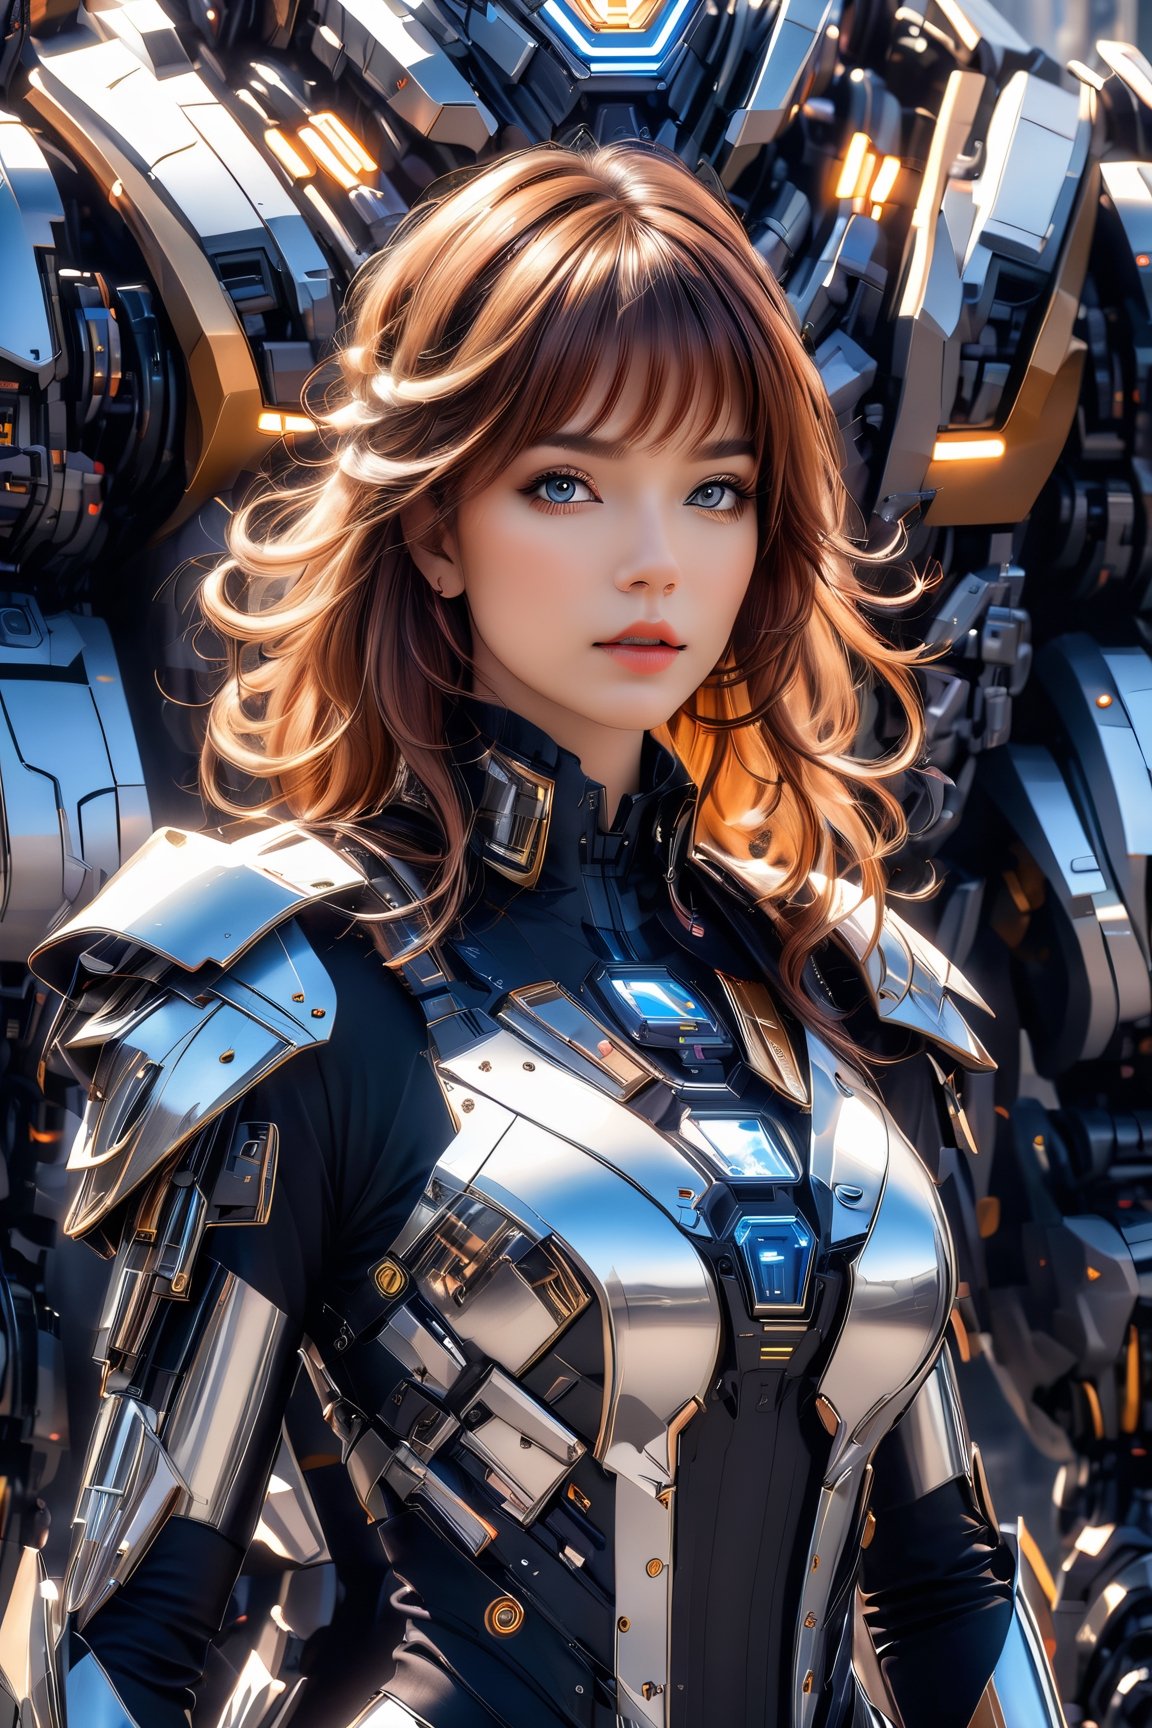 fierce beauty ((full body)), her brown hair with blonde highlights on her bangs cascading down the side of her face and shoulders, standing inside of a MECH suit, (masterpiece, top quality, best quality, official art, beautiful and aesthetic:1.2), (1girl), extreme detailed,(fractal art:1.3),colorful,highest detailed,zoomout,perfecteyes, random hairstyle
,alluring_lolita_girl,RedHoodWaifu,beautymix,futurecamisole,mecha,xxmix_girl,Movie Still,Film Still,Wearing edgTemptation,Cinematic,p3rfect boobs,skirtlift,cleavage,Cinematic Shot,Cinematic Lighting,aesthetic portrait,photo r3al,cyborg style